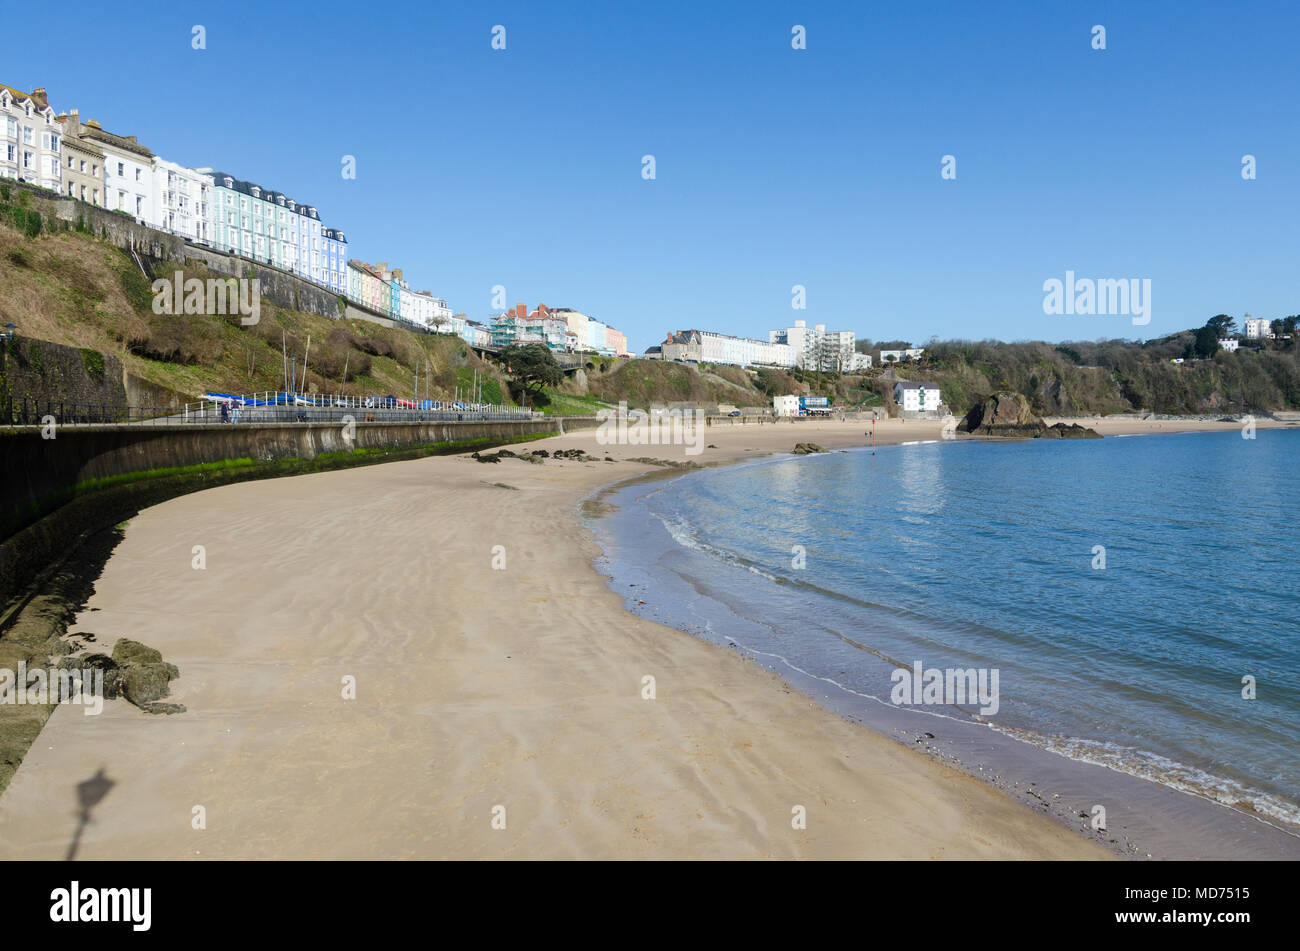 Wide expanse of sandy beach at the Pembrokeshire harbour town of Tenby, Wales Stock Photo